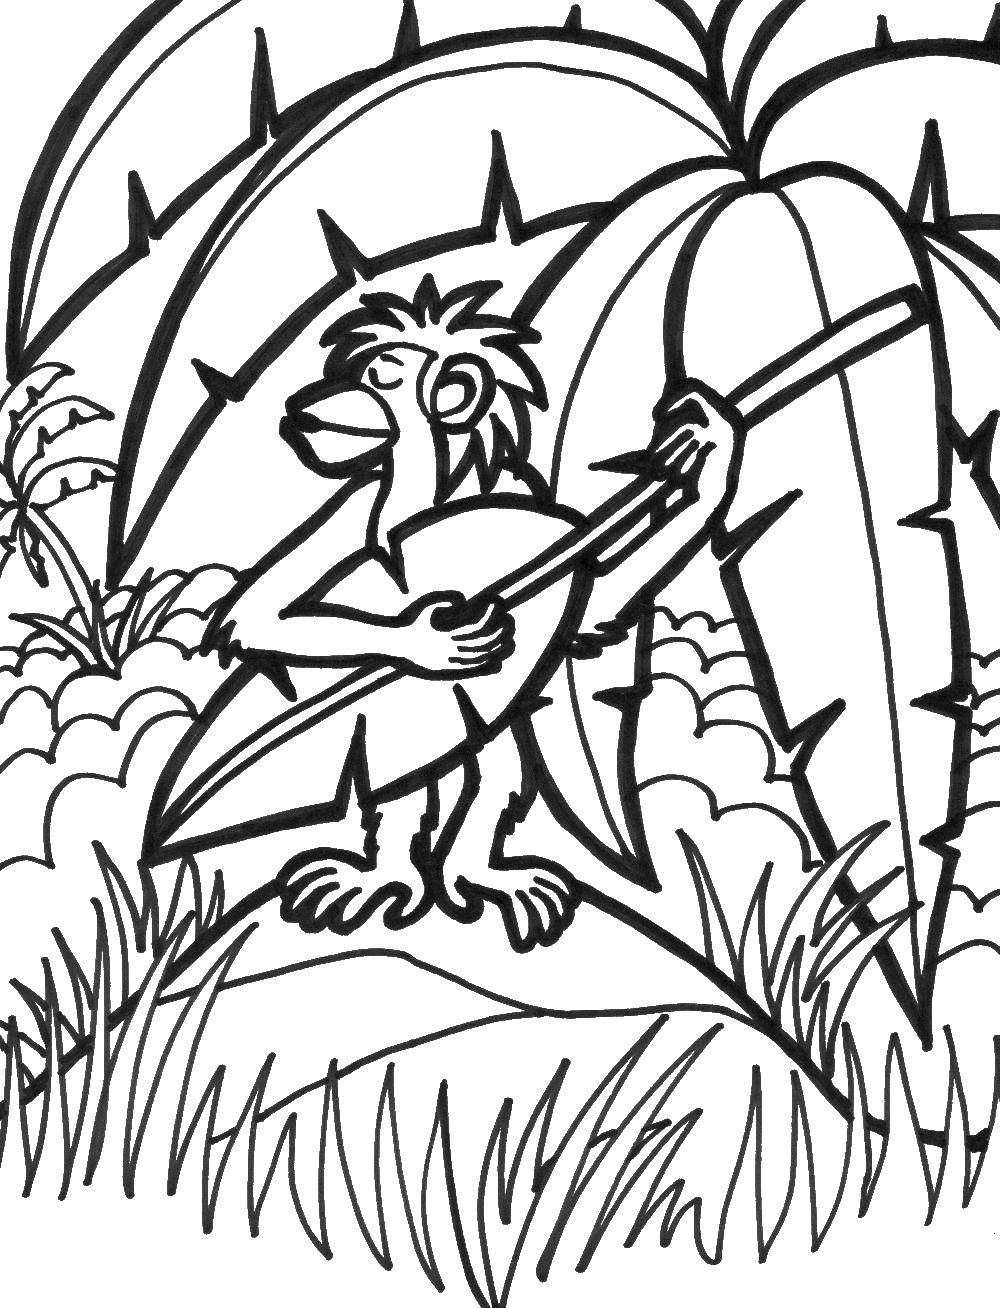 Coloring Monkey plays on a piece of paper. Category Music. Tags:  Music, instrument, musician, note.